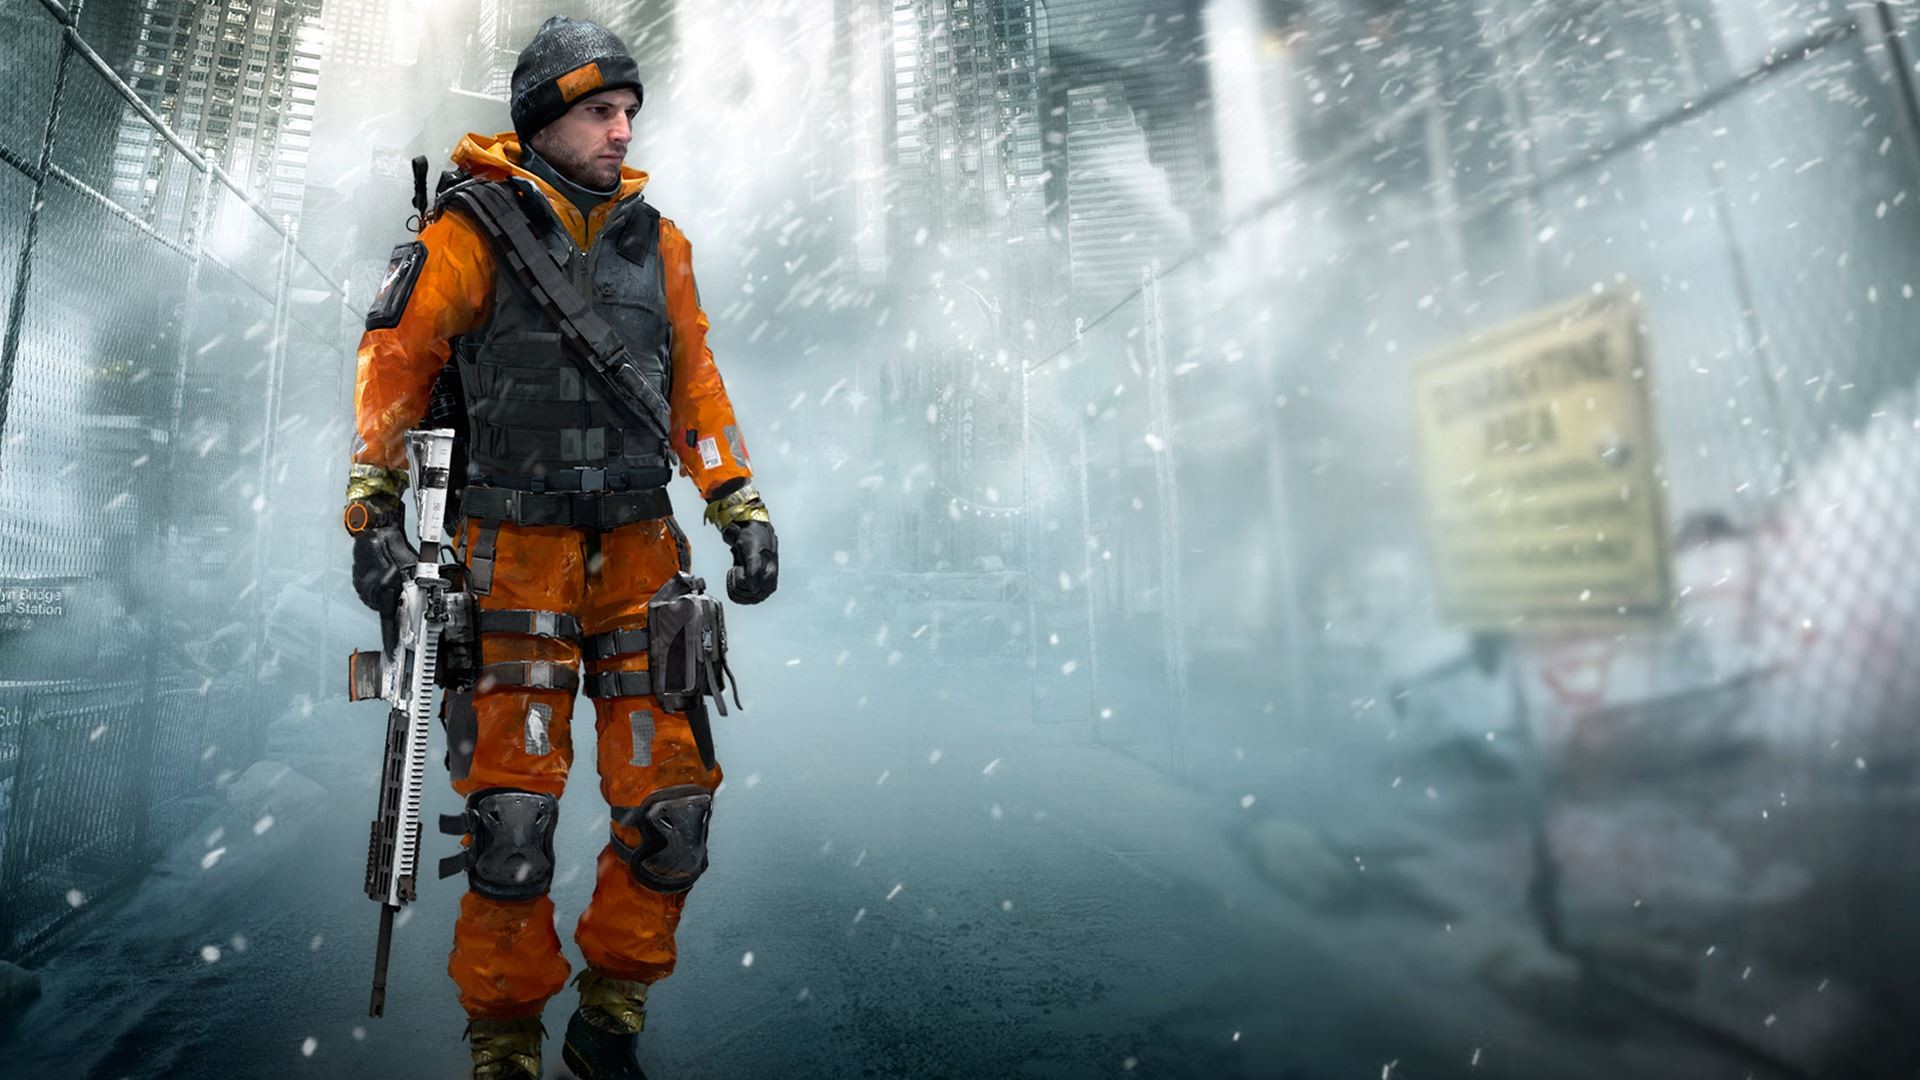 1920x1080 The Division Wallpaper Free Download The Division Wallpaper Iphone 6